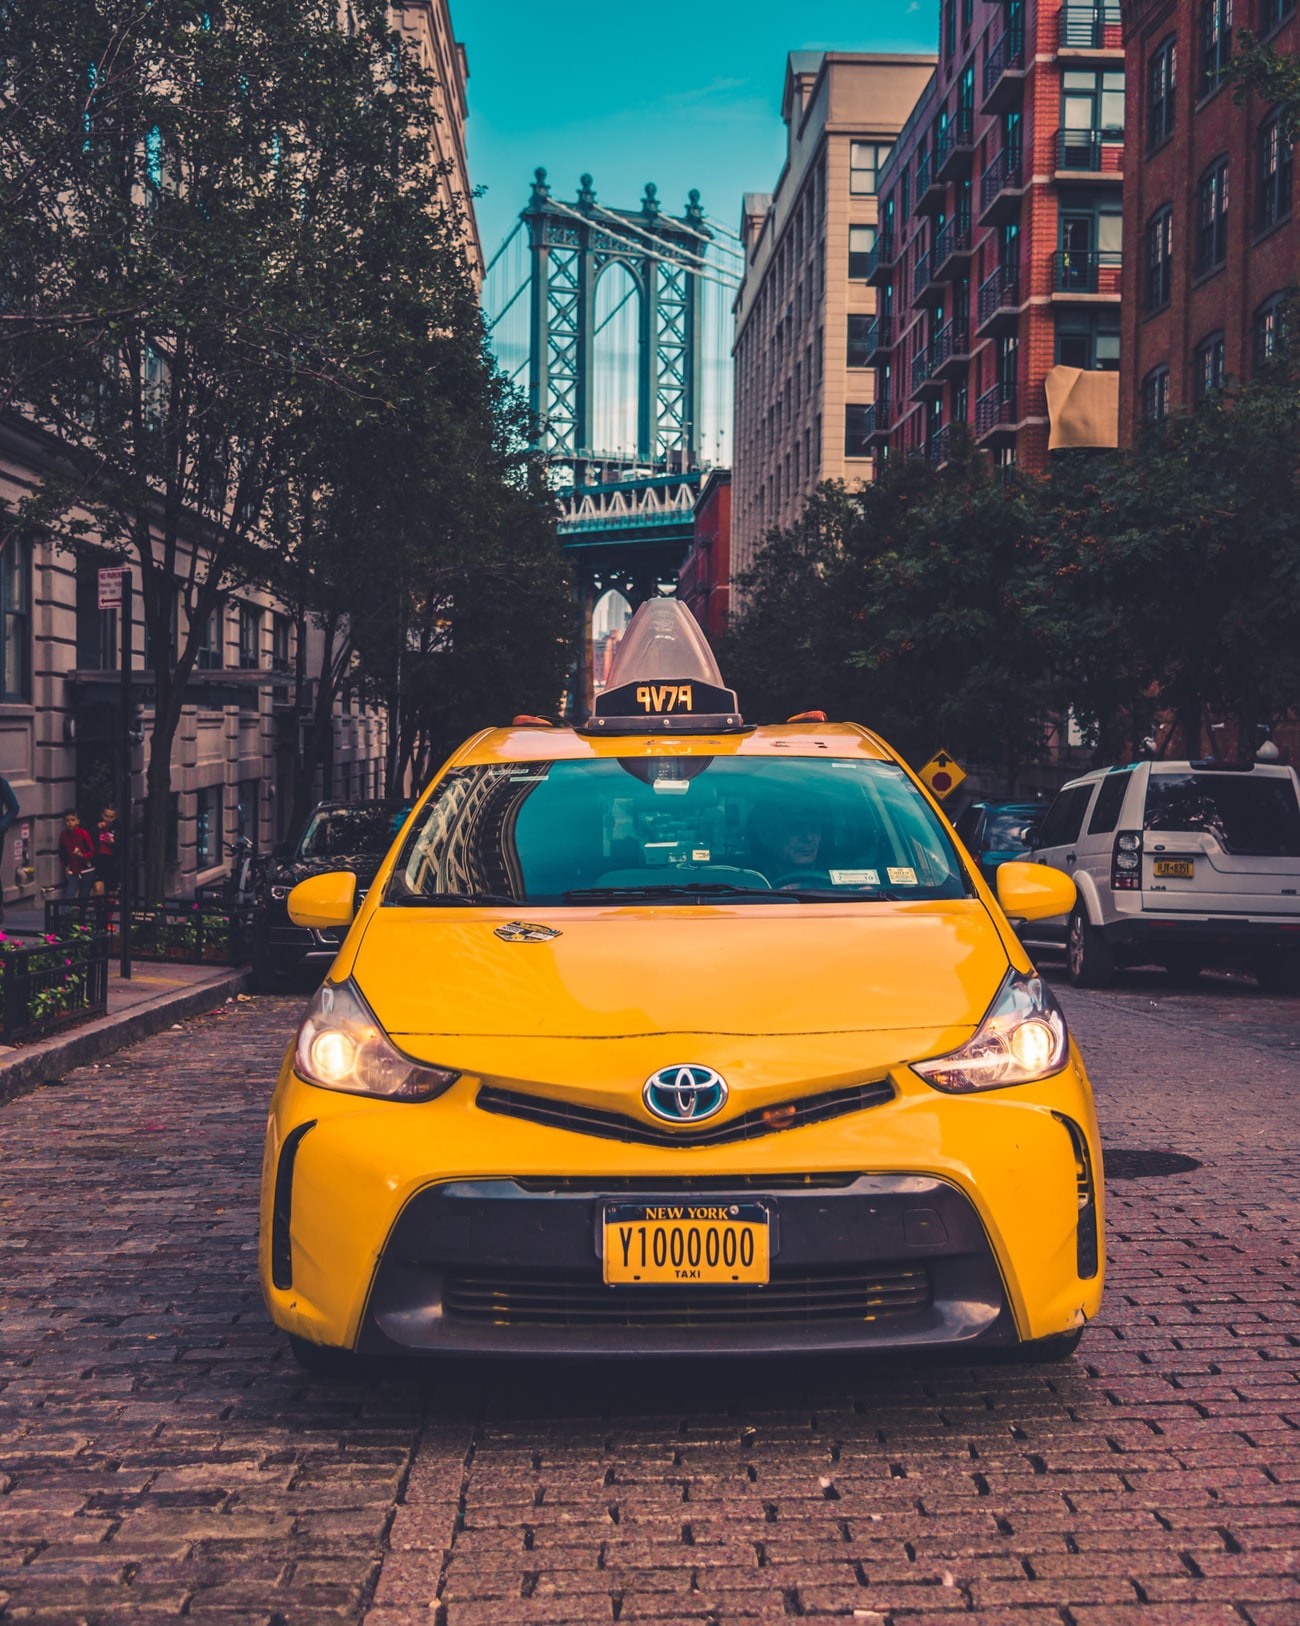 The study revealed that the fuel efficiency of the medallion taxi fleet climbed from 15.7 to 33.1 MPG, while nitrous oxide emissions declined by 82% and particulate exhaust declined by 49%. The greatest benefits were found in Manhattan neighborhoods with a high density of yellow taxis.